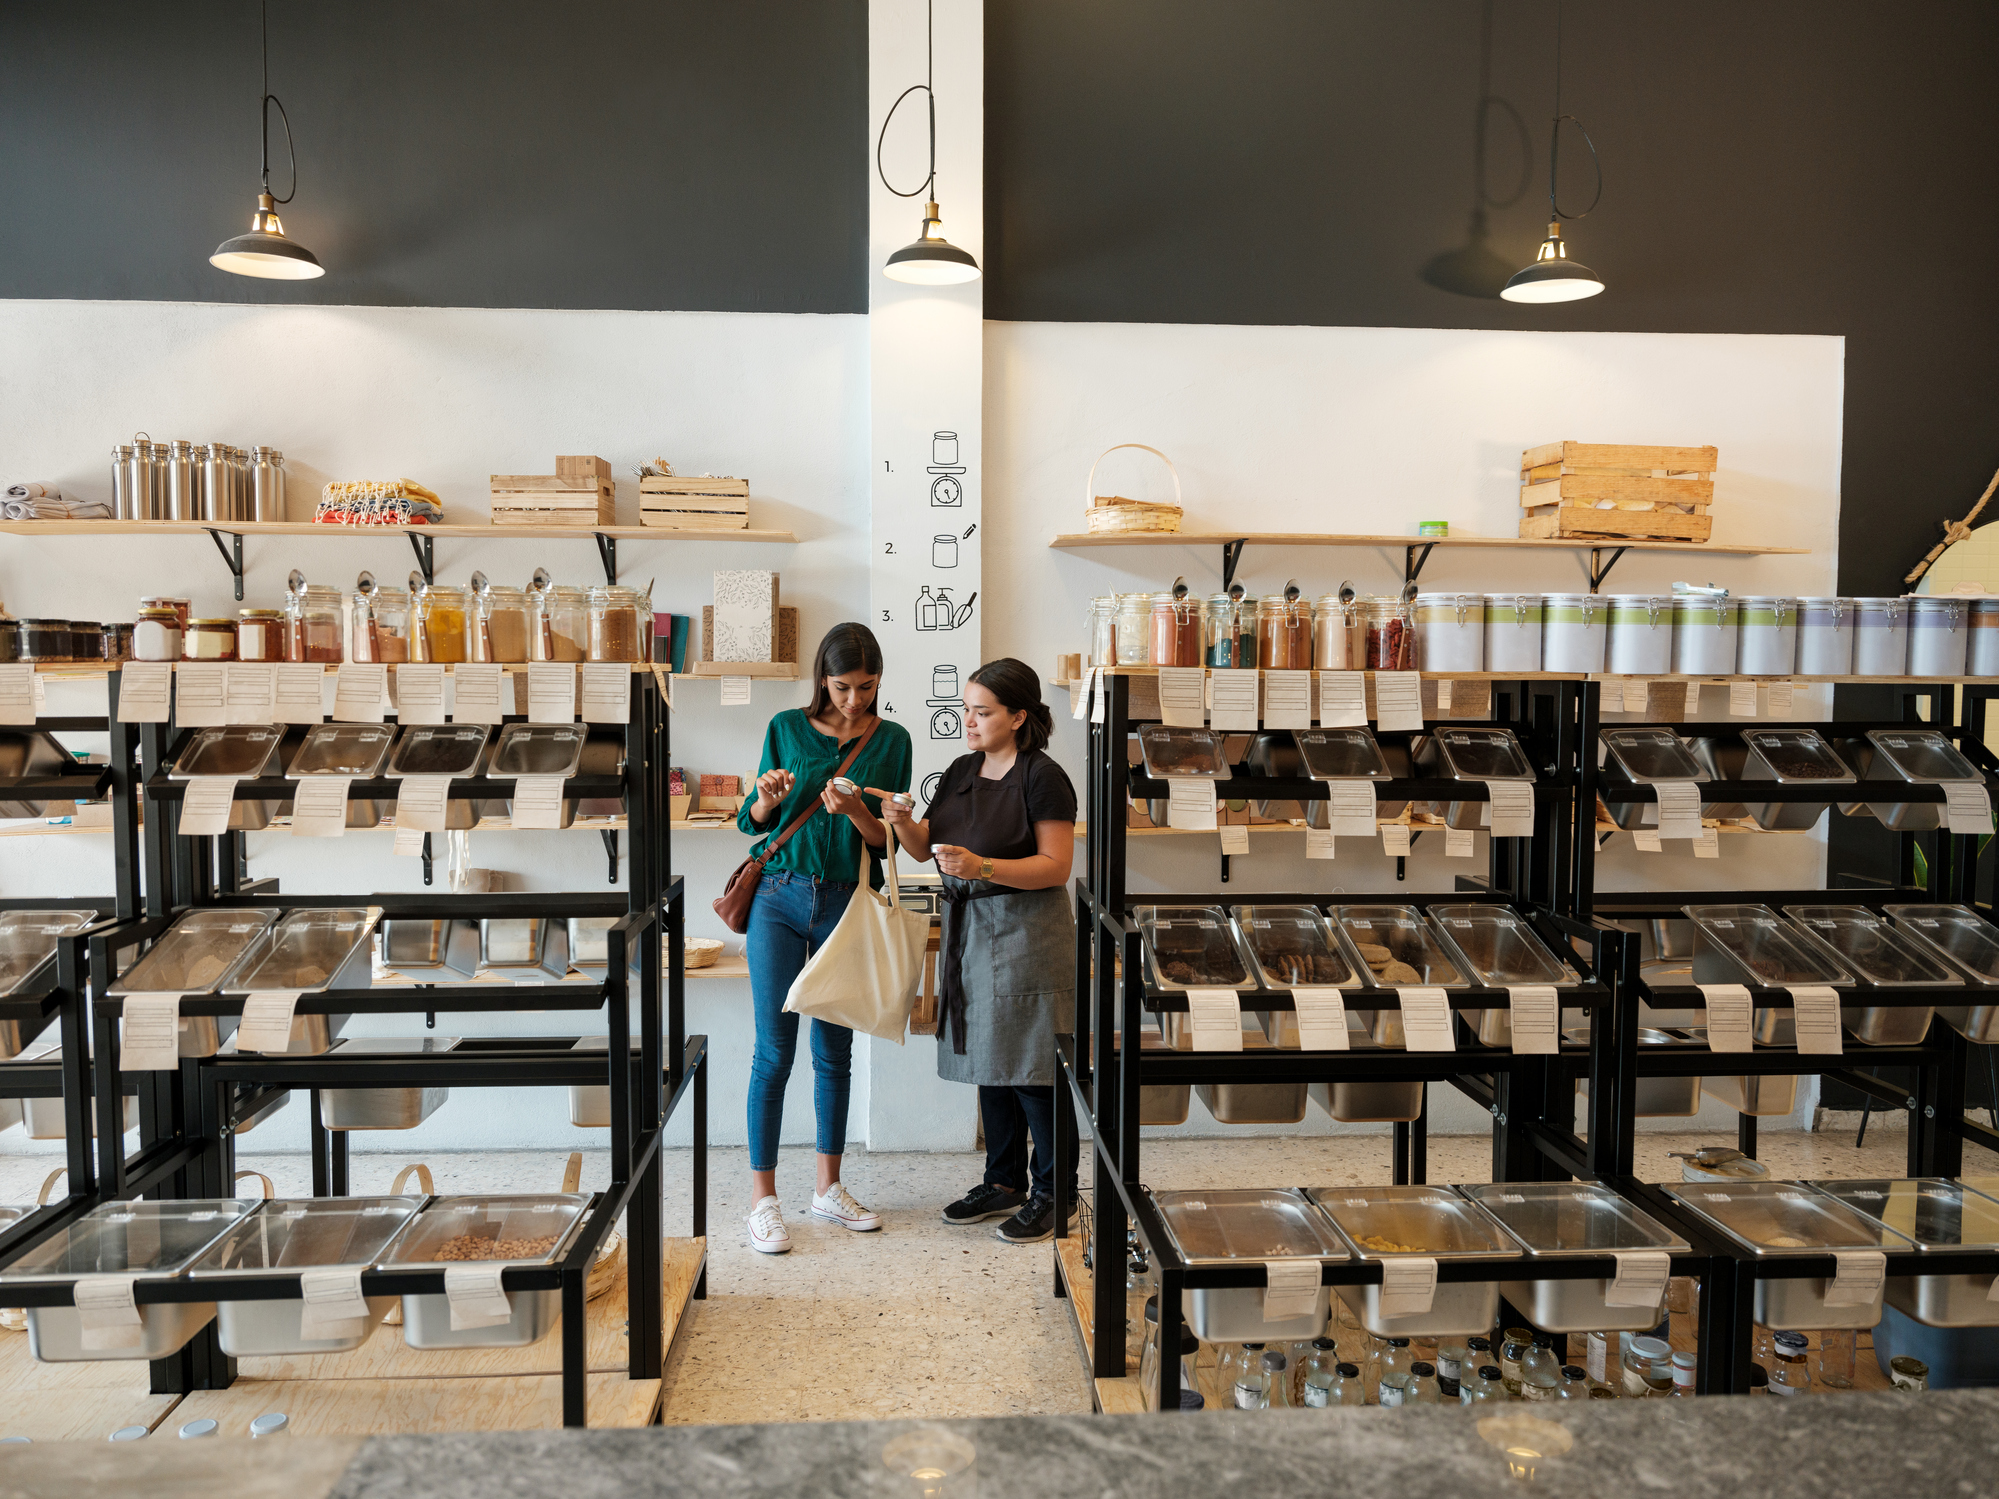 A sustainable shopper shopping in a zero waste store.